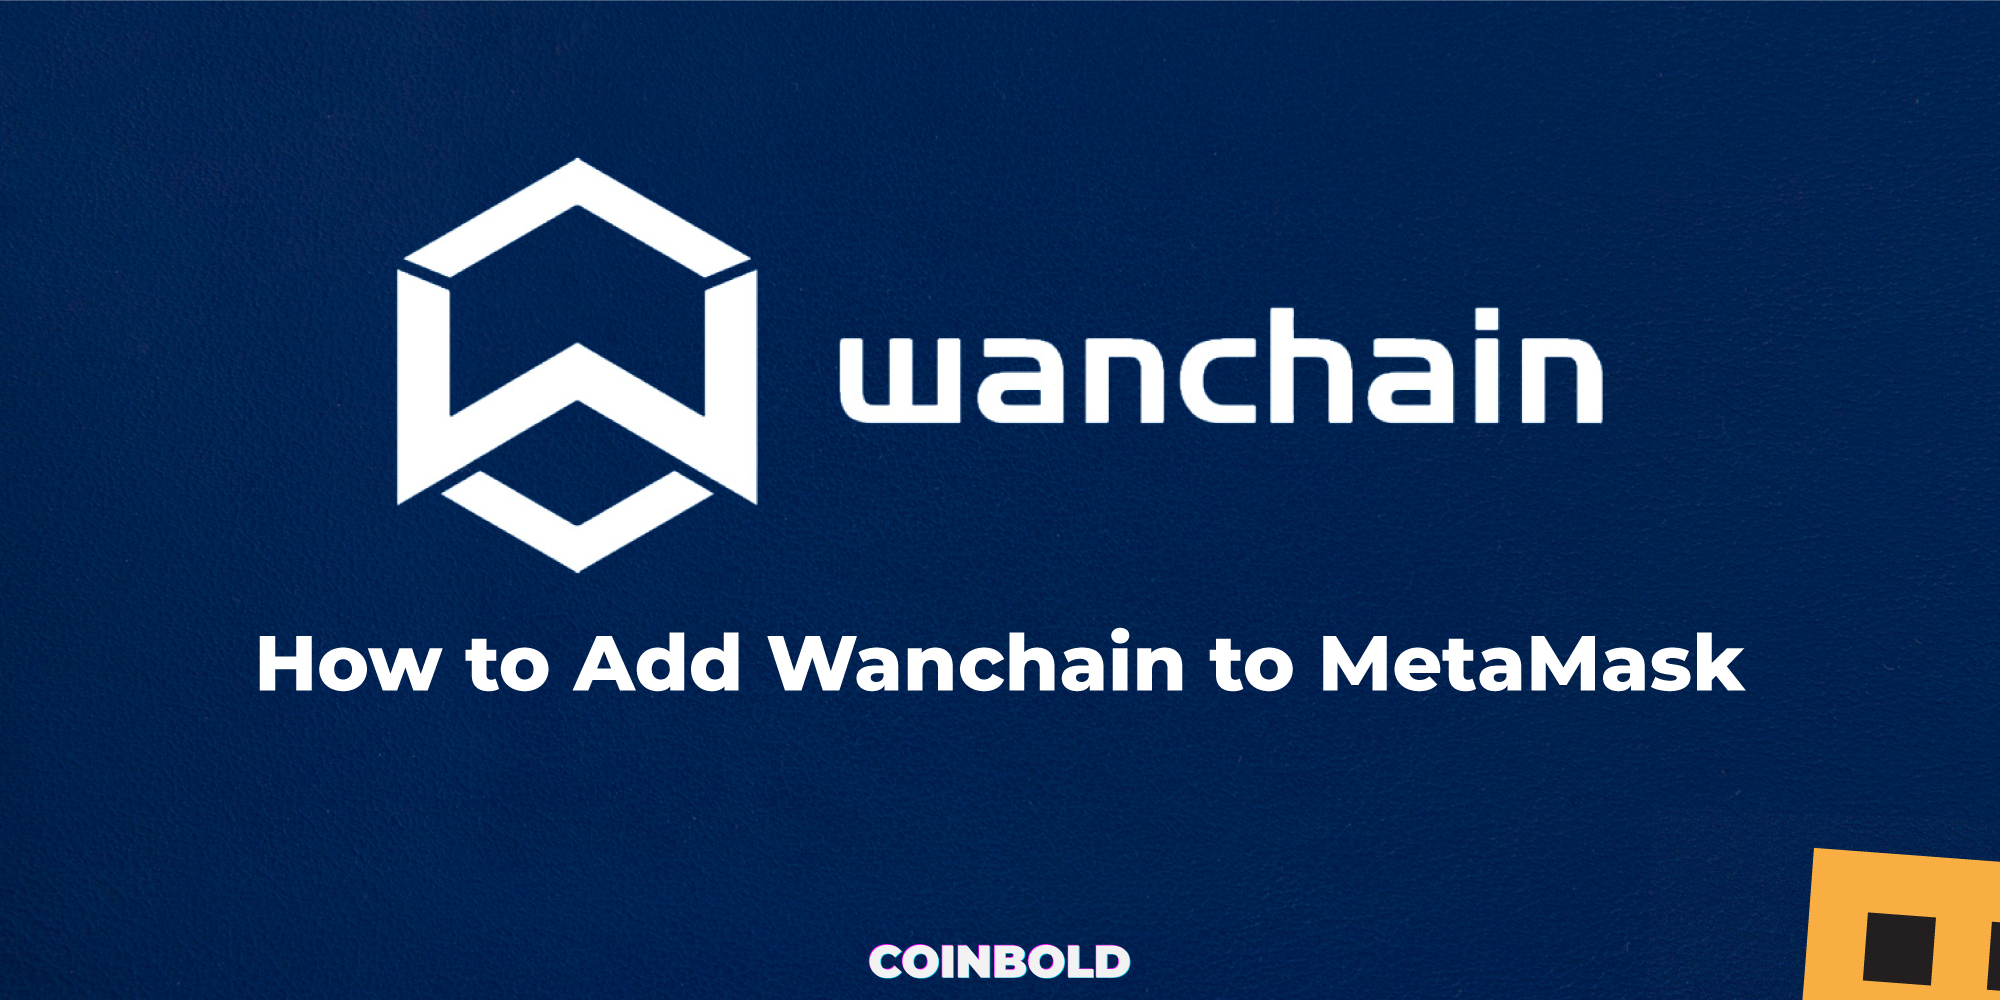 How to Add Wanchain to MetaMask